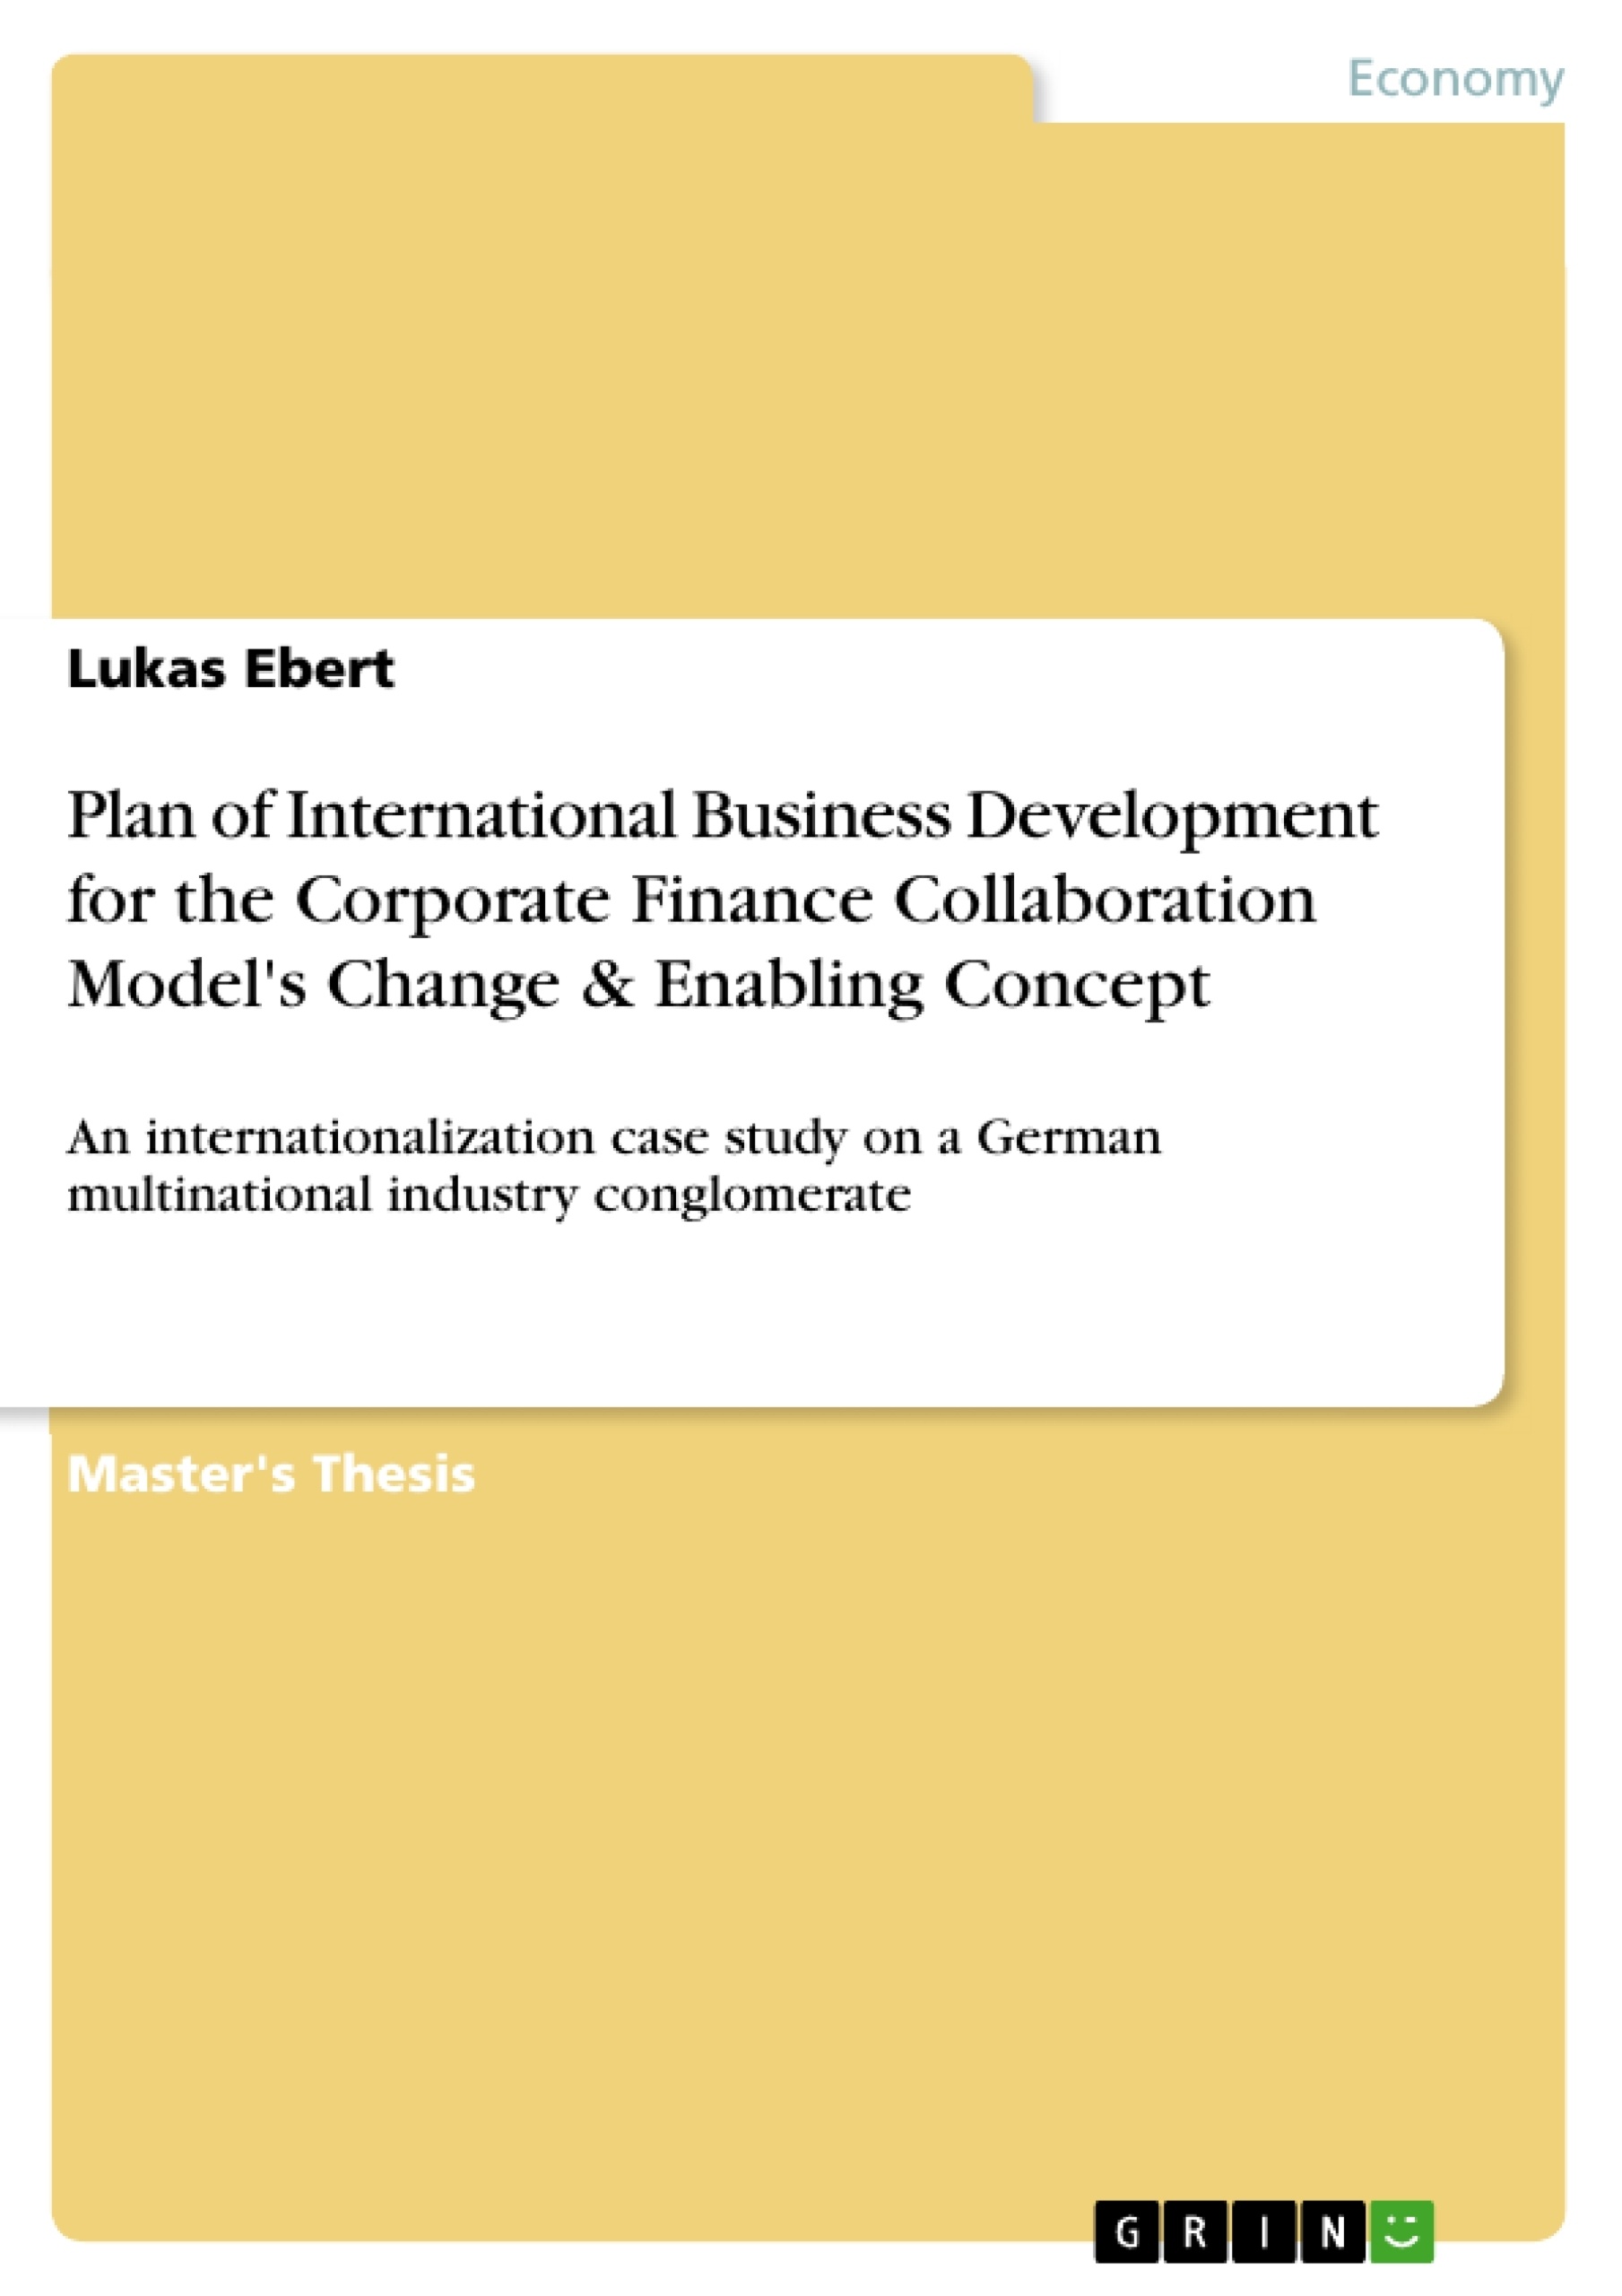 Title: Plan of International Business Development for the Corporate Finance Collaboration Model's Change & Enabling Concept